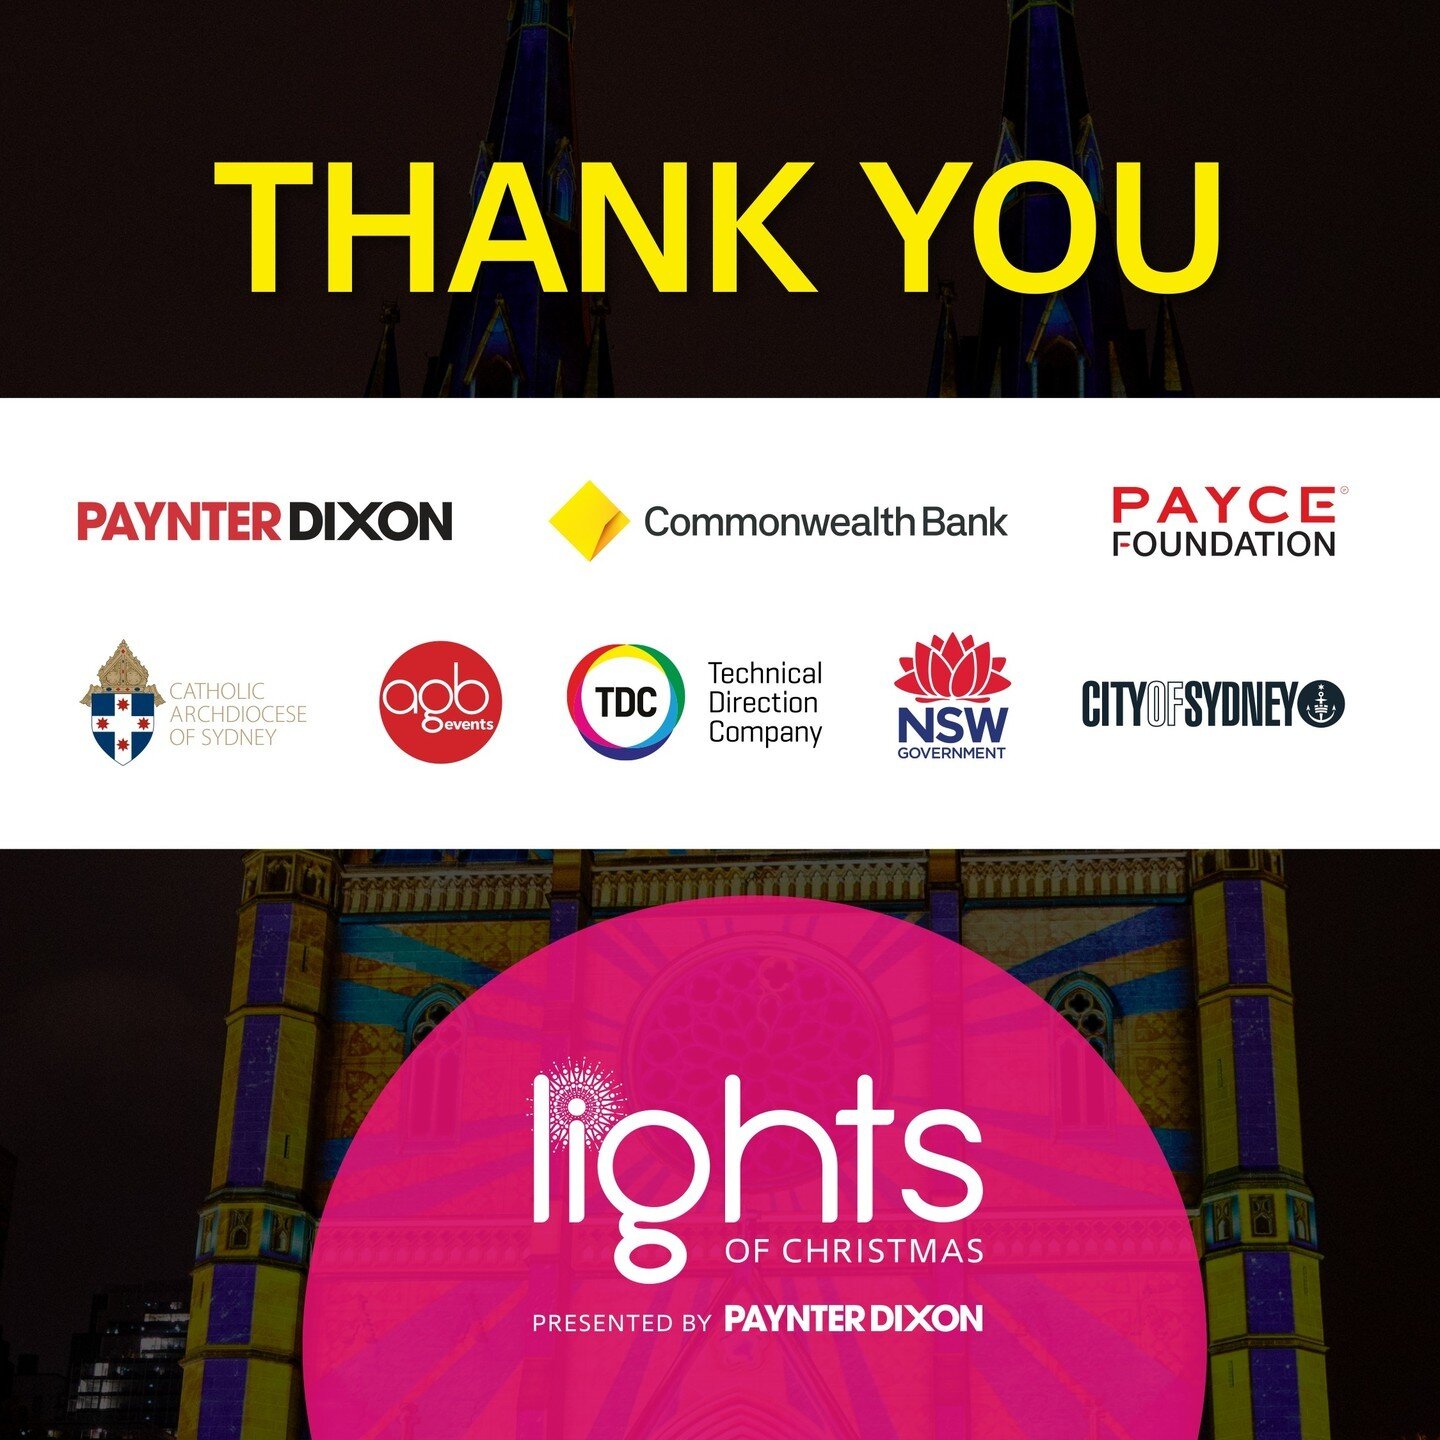 An appreciation post on Christmas Eve to acknowledge the amazing supporters of Lights of Christmas! 
Thankyou @paynterdixon @commbank @payce_australia @cityofsydney @technicaldirectioncompany @sydarchdiocese for your commitment to this important Chri